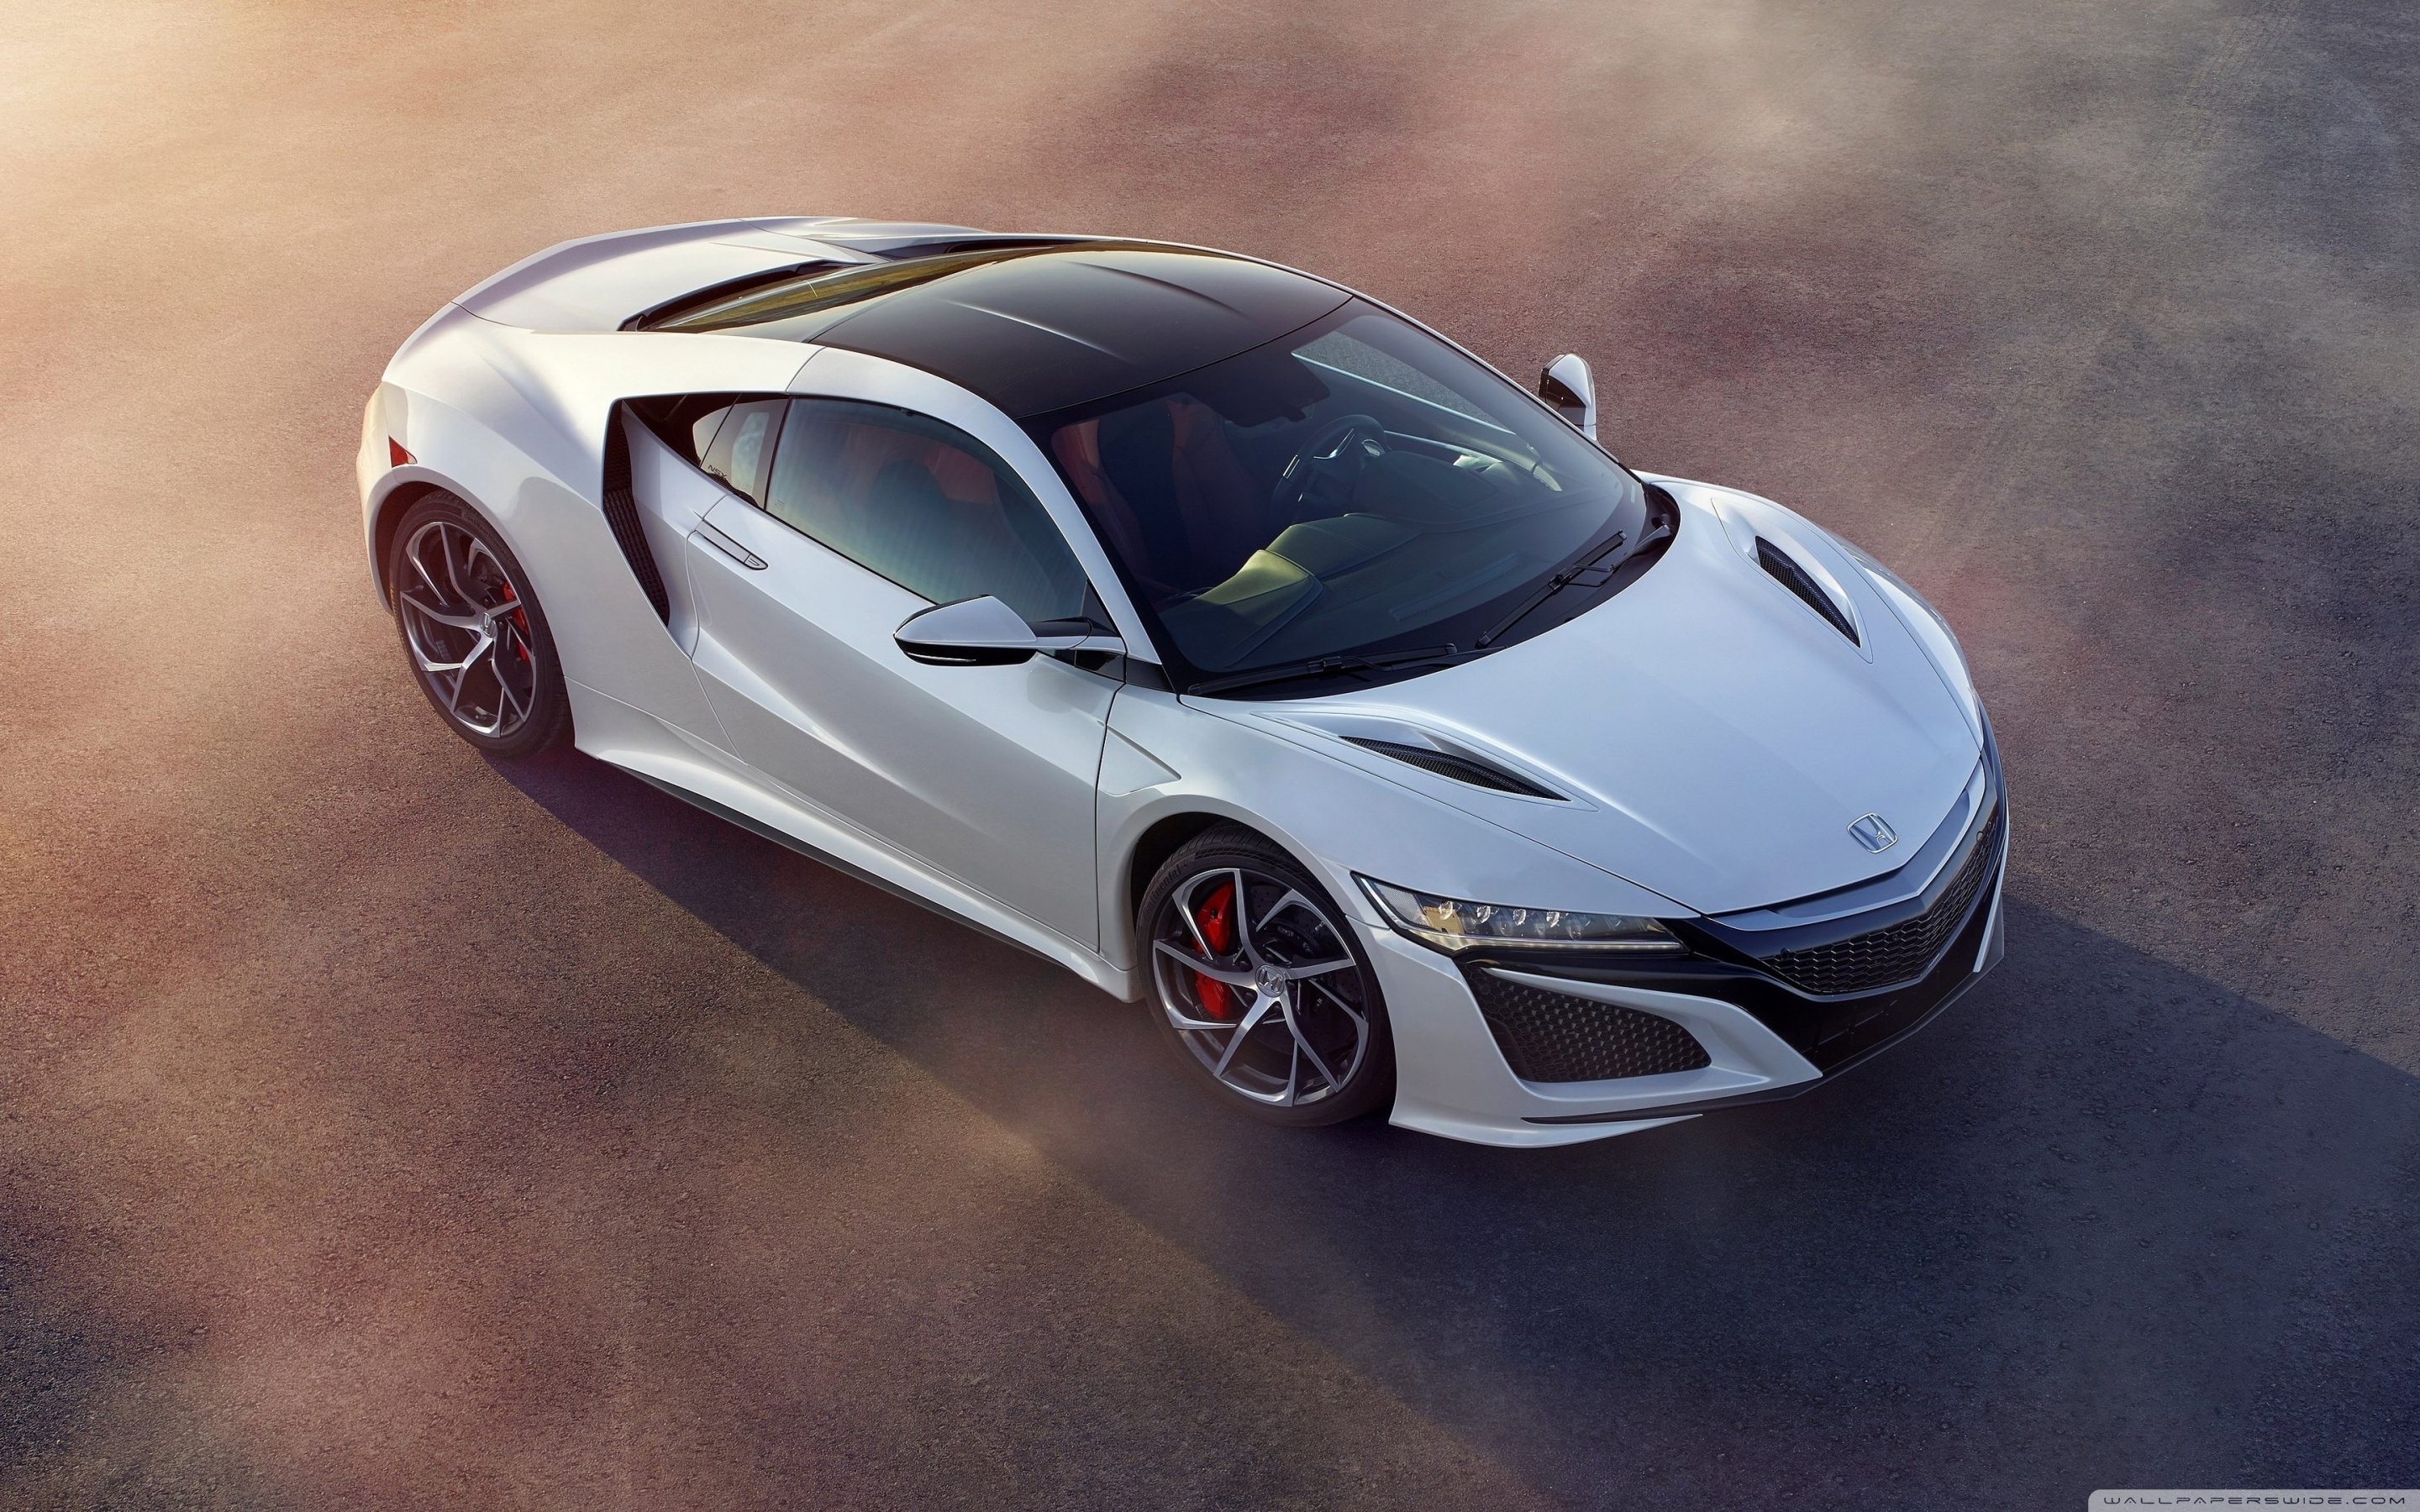 Acura Nsx Coupe White Car Ultra Hd Desktop Background Wallpaper For 4k Uhd Tv Widescreen Ultrawide Desktop Laptop Multi Display Dual Monitor Tablet Smartphone